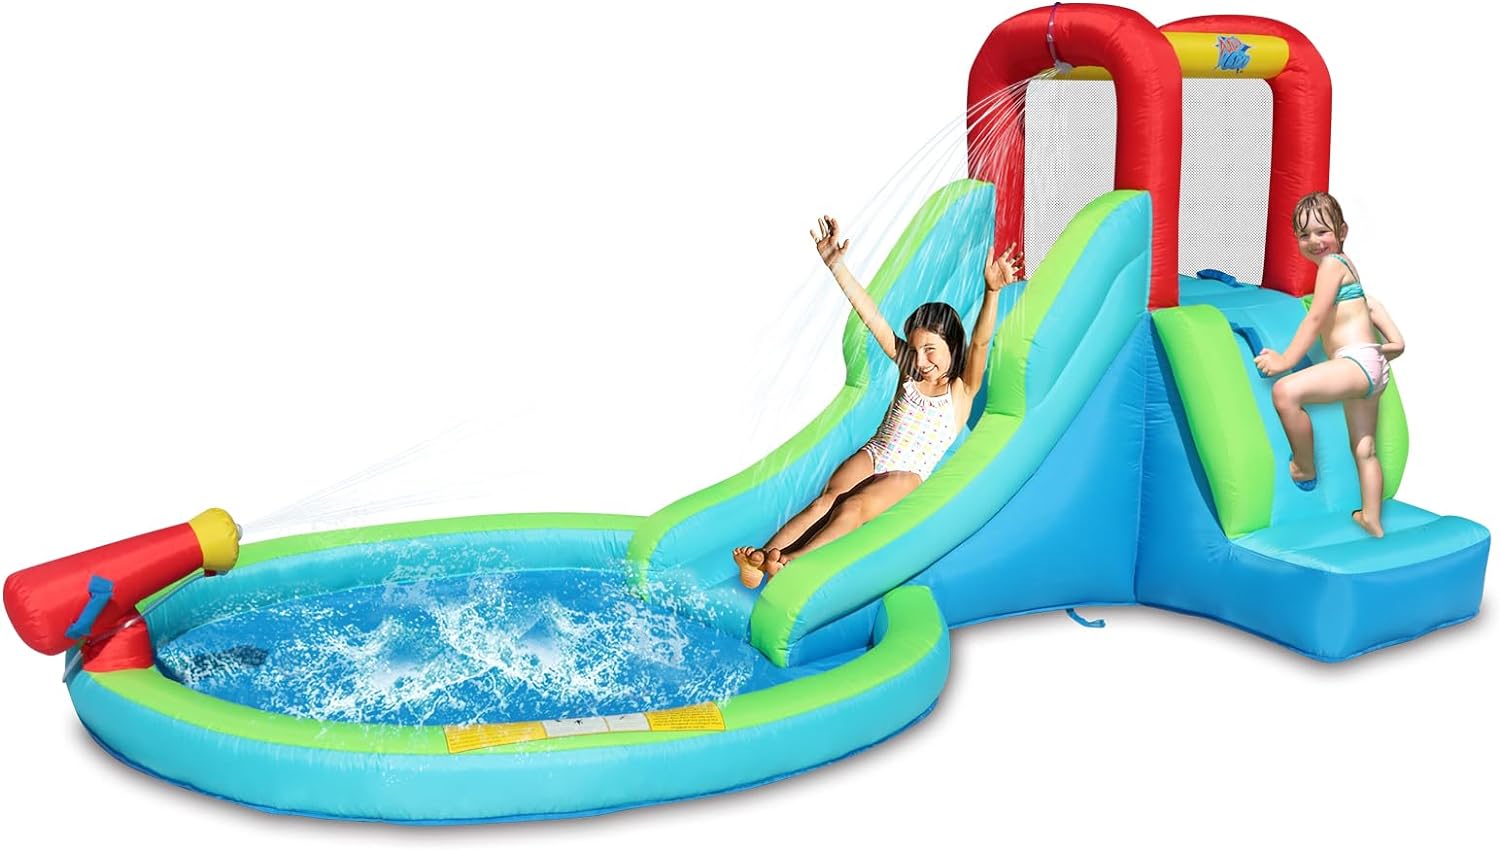 ACTION AIR Inflatable Waterslide, Bounce House with Slide for Wet and Dry, Kids Backyard Waterpark for Summer Fun, Water Gun & Splash Pool for Age 3-6, Love for Kids